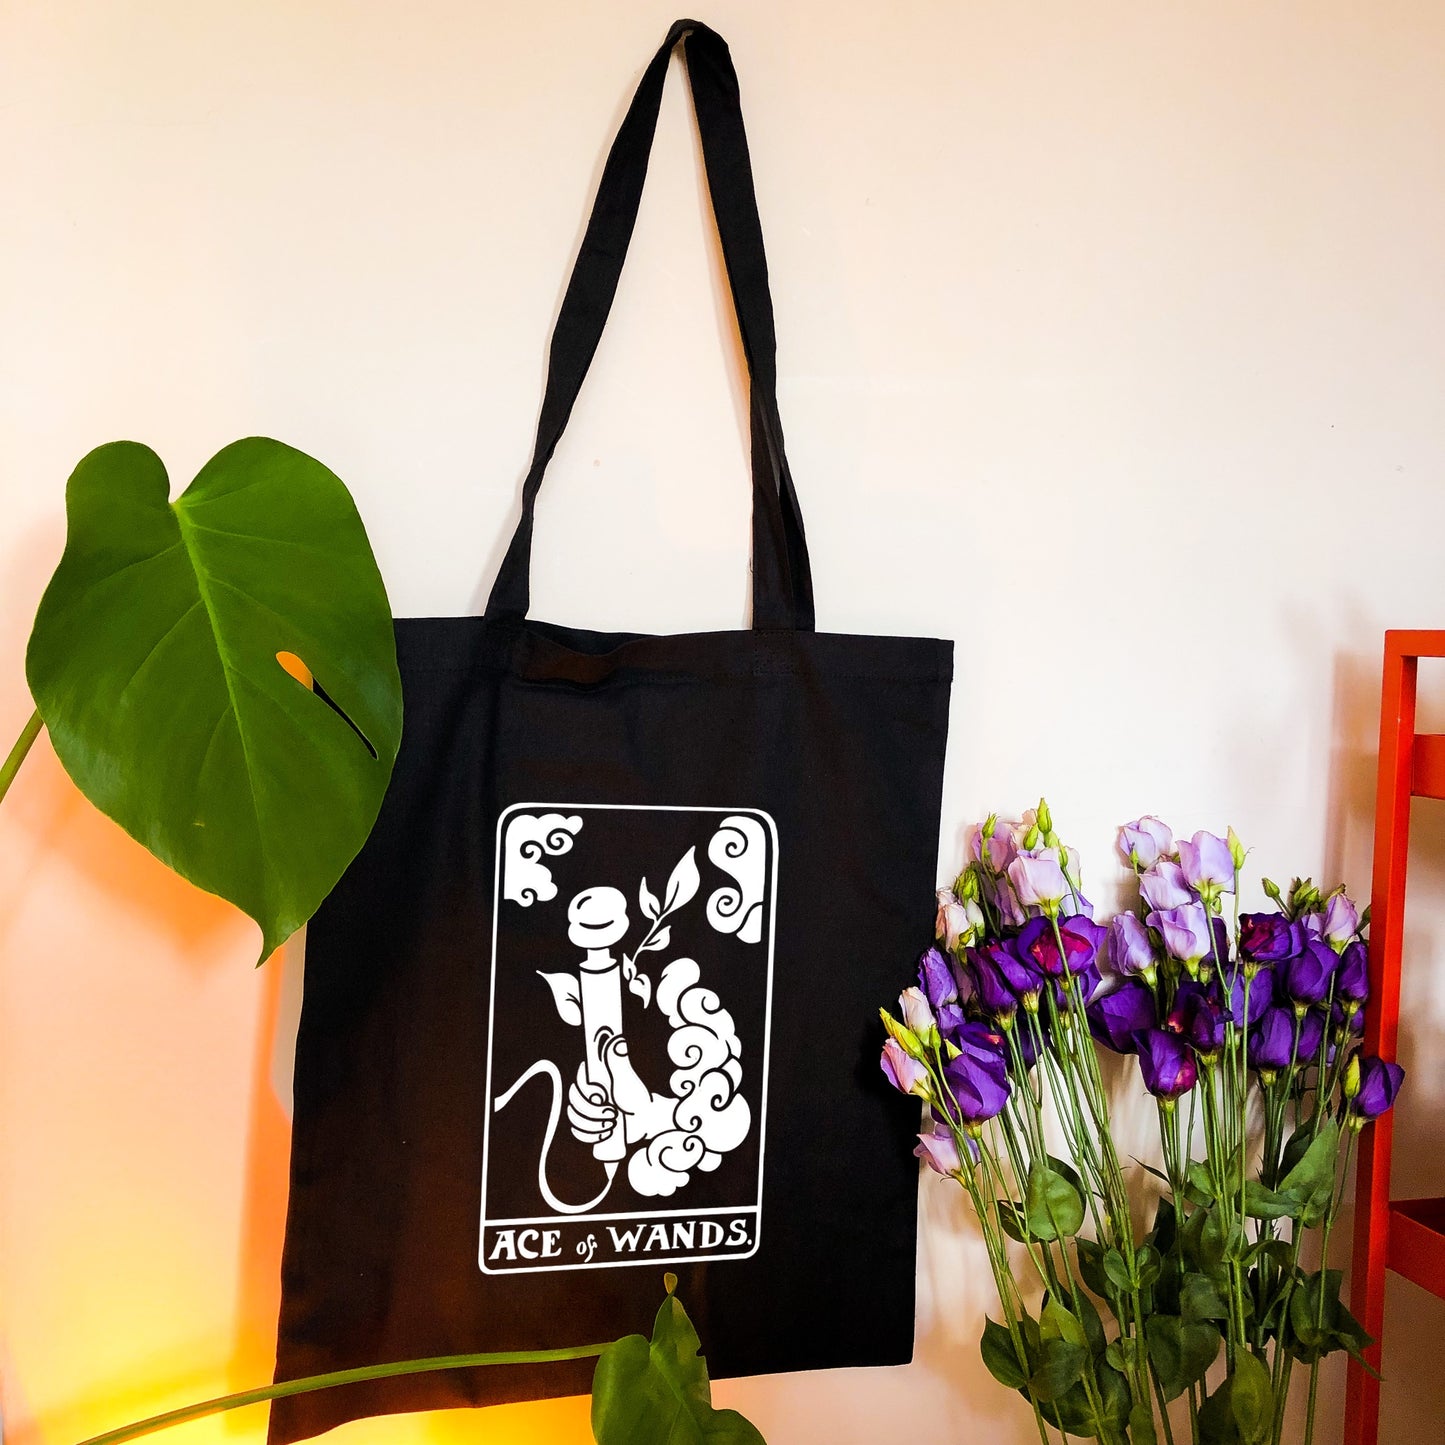 Black tote bag with white tarot card design. Original design based on Ace of Wands tarot card. A hand is coming out a cloud and holding a vibrator with the text ACE OF WANDS beneath